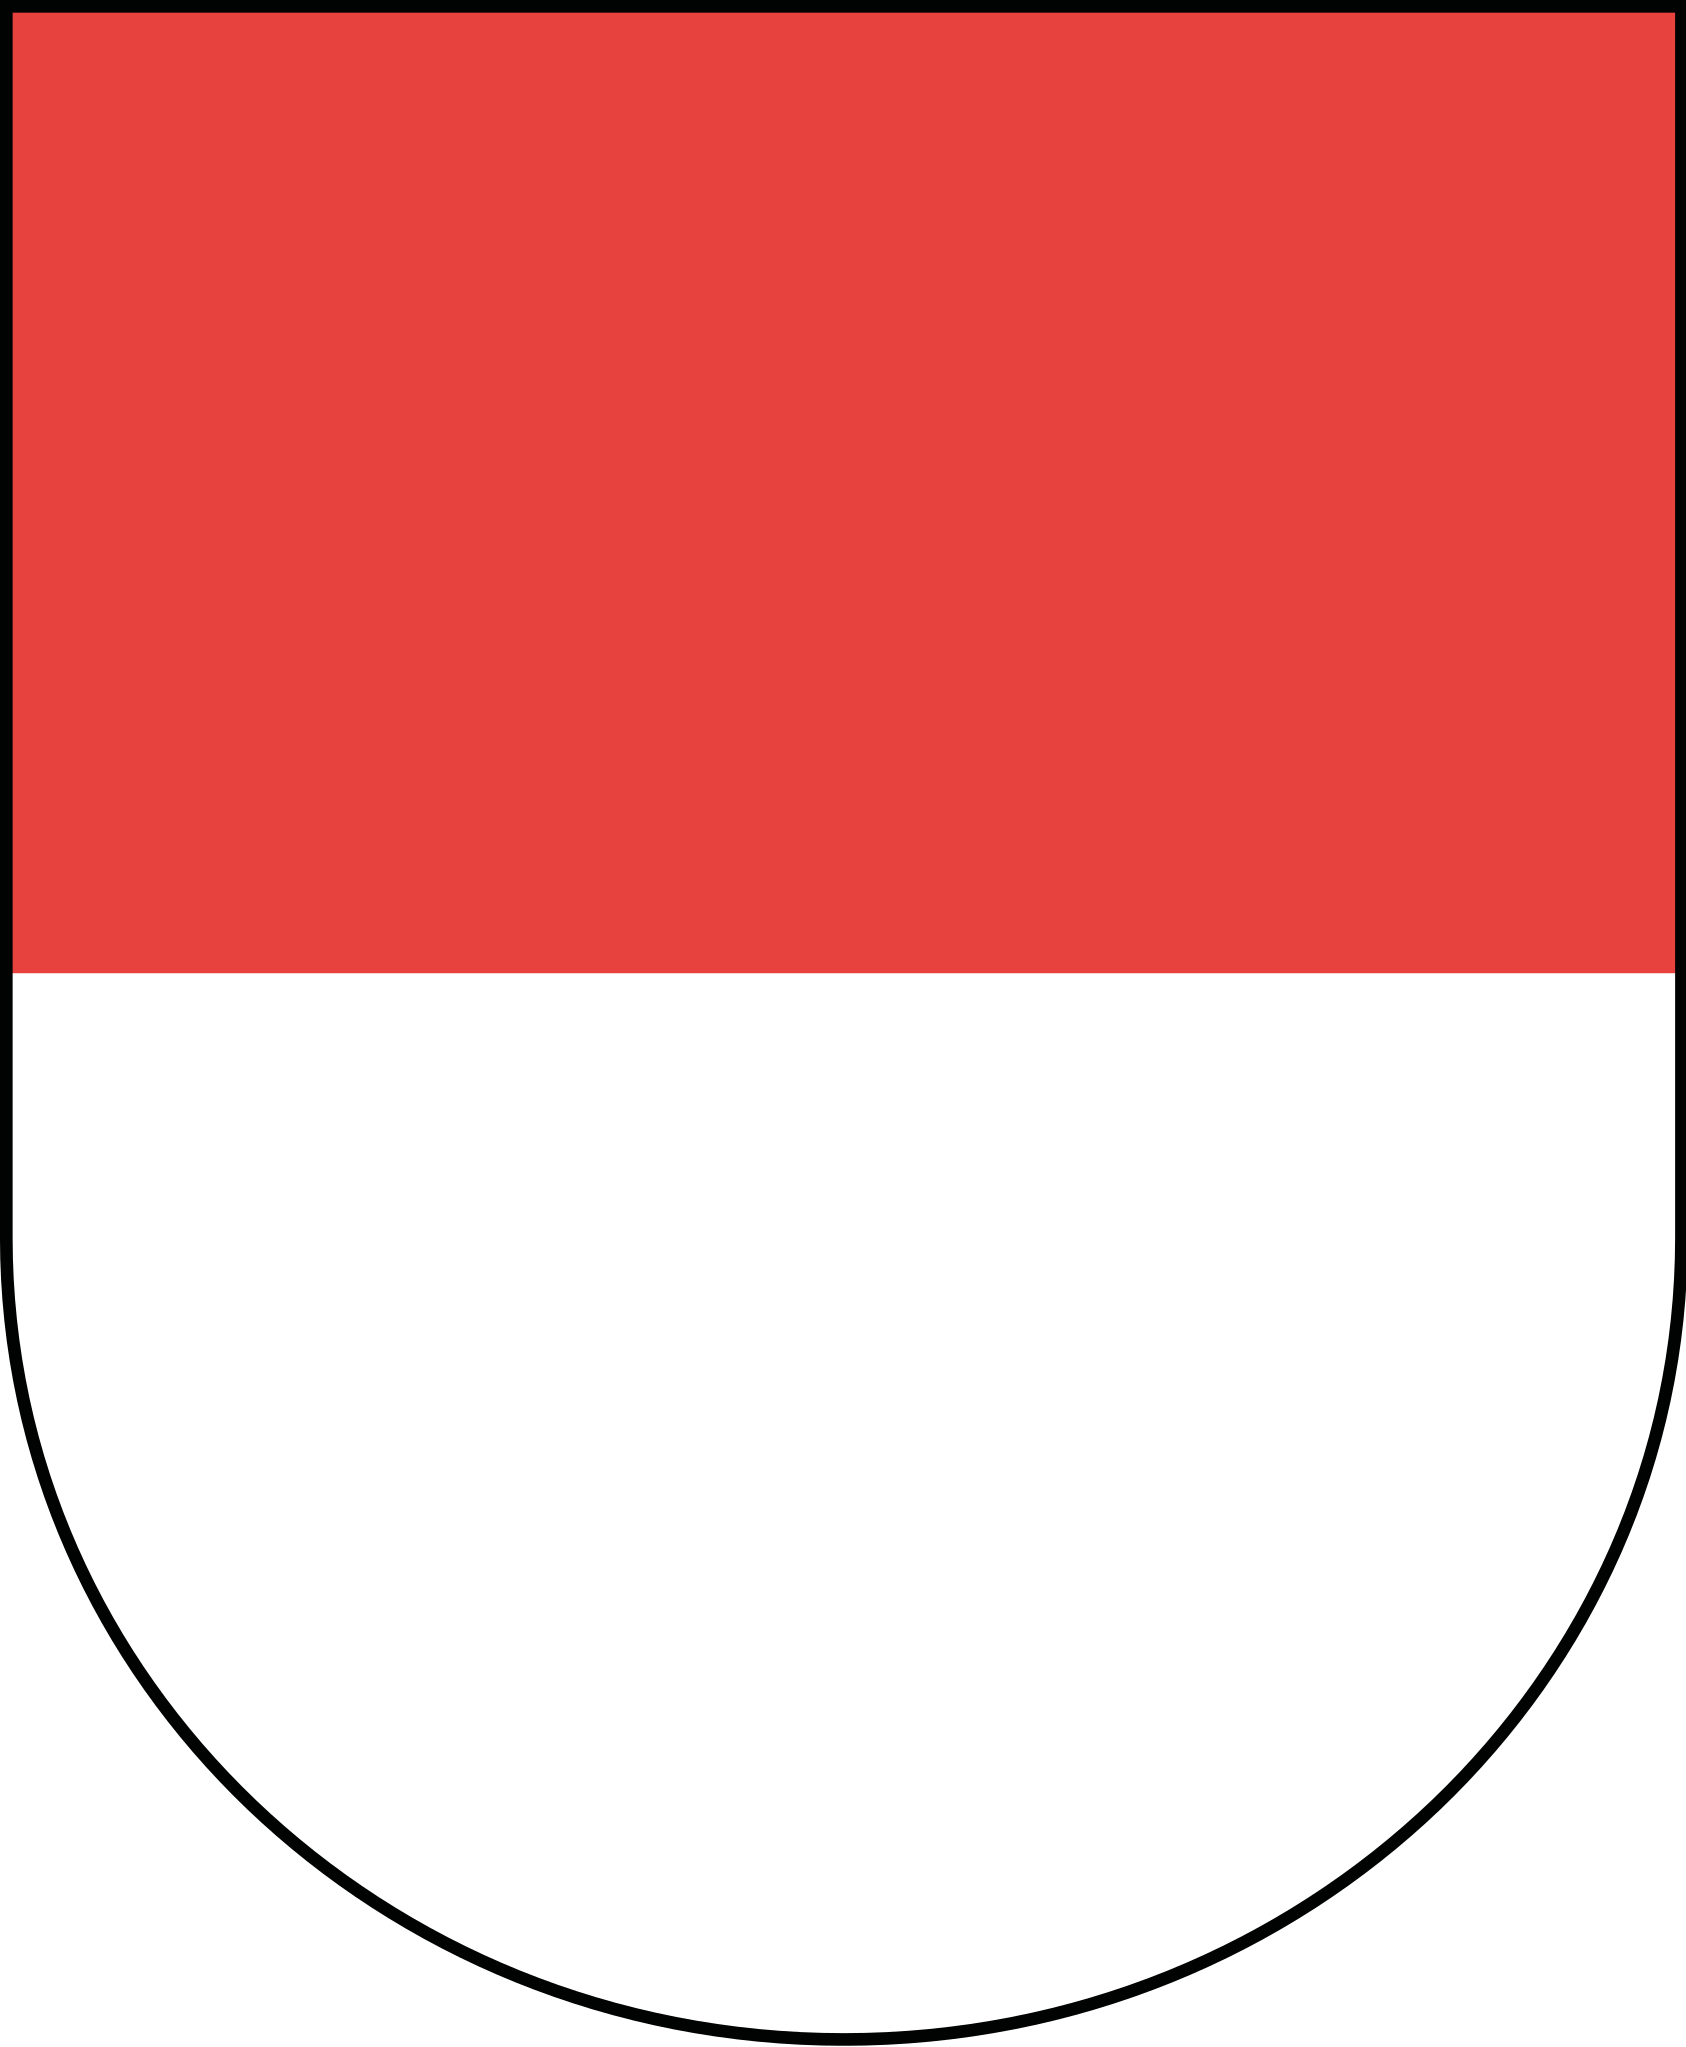 Coat of arms of the Canton of Solothurn